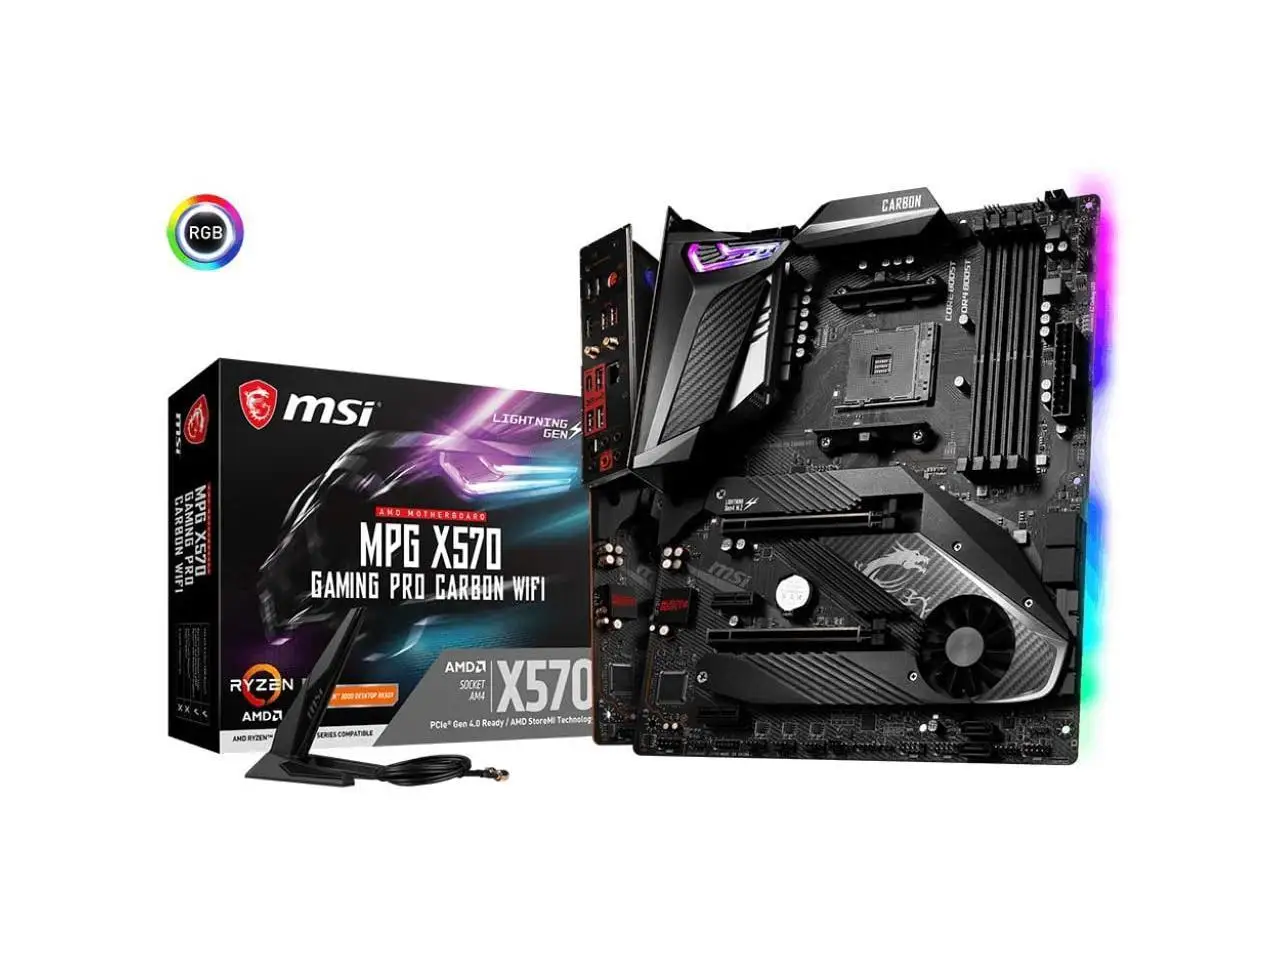 

MSI MPG X570 GAMING PRO CARBON WIFI Motherboard (AMD AM4, DDR4, PCIe 4.0, SATA 6Gb/s, M.2, USB 3.2 Gen 2, AX Wi-Fi 6, HDMI, ATX)